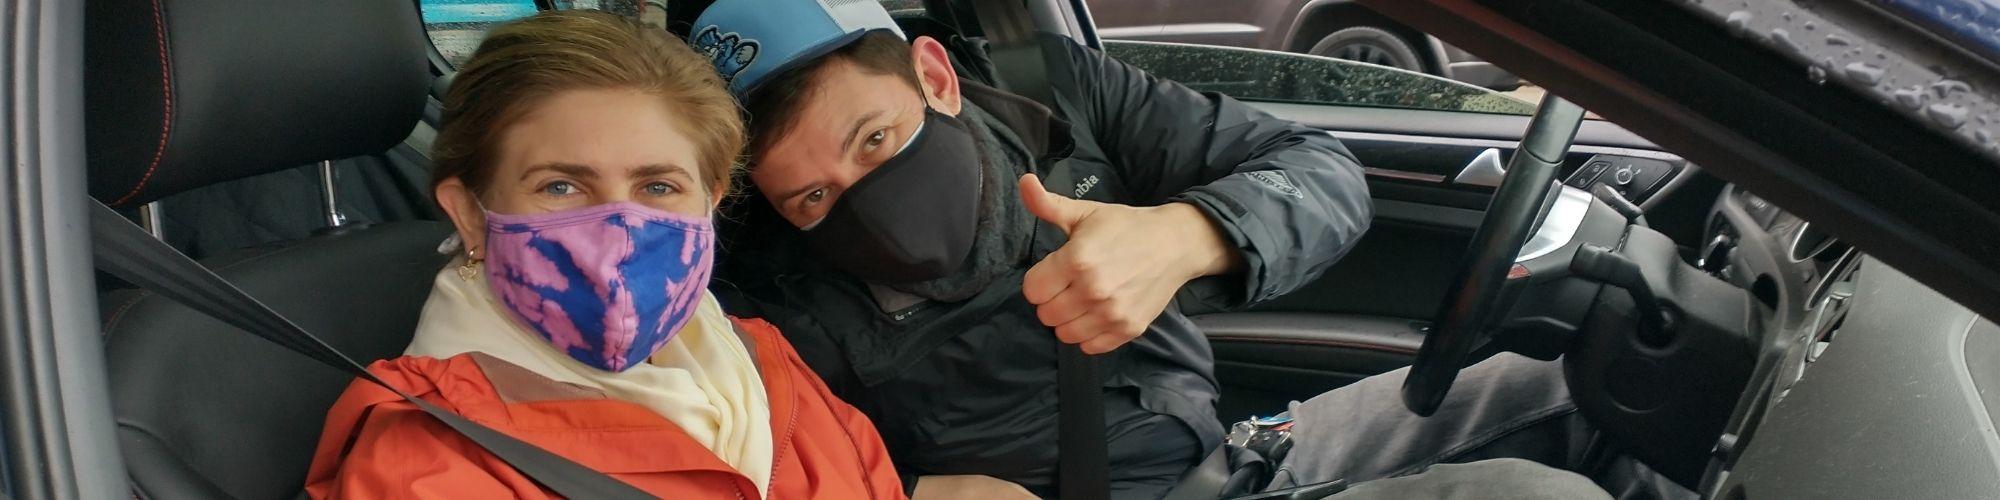 Two volunteer drivers in the front seat smiling under their facemasks, with the male volunteer showing thumbs up.